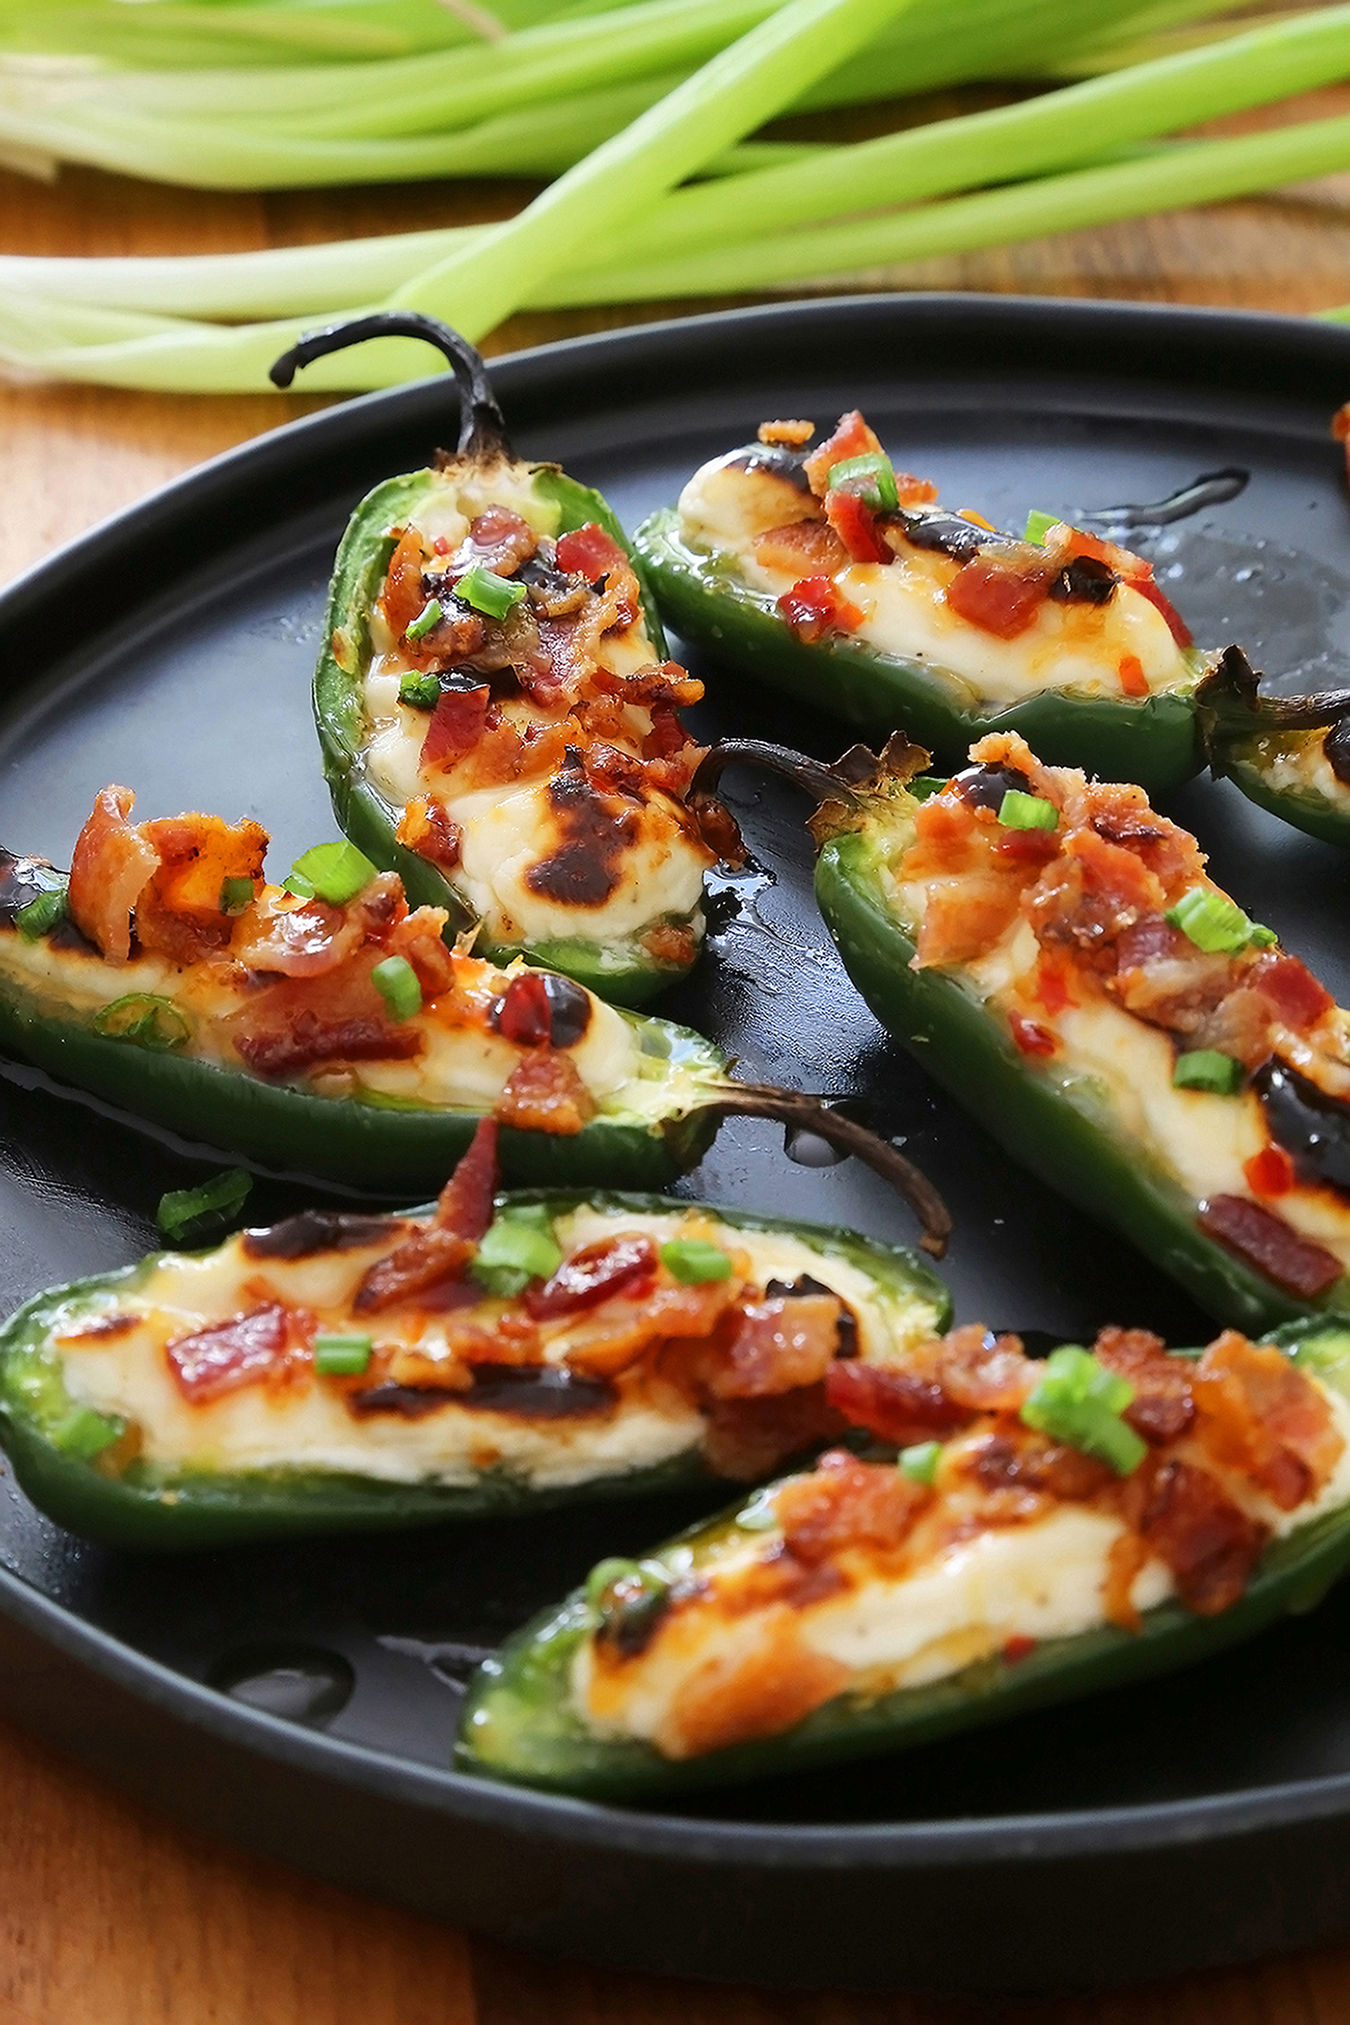 Bacon-Goat Cheese Jalapeño Poppers - Salty-crisp bacon, creamy goat cheese, savory-sweet jelly, all tucked into a roasted jalapeño! Thecomfortofcooking.com